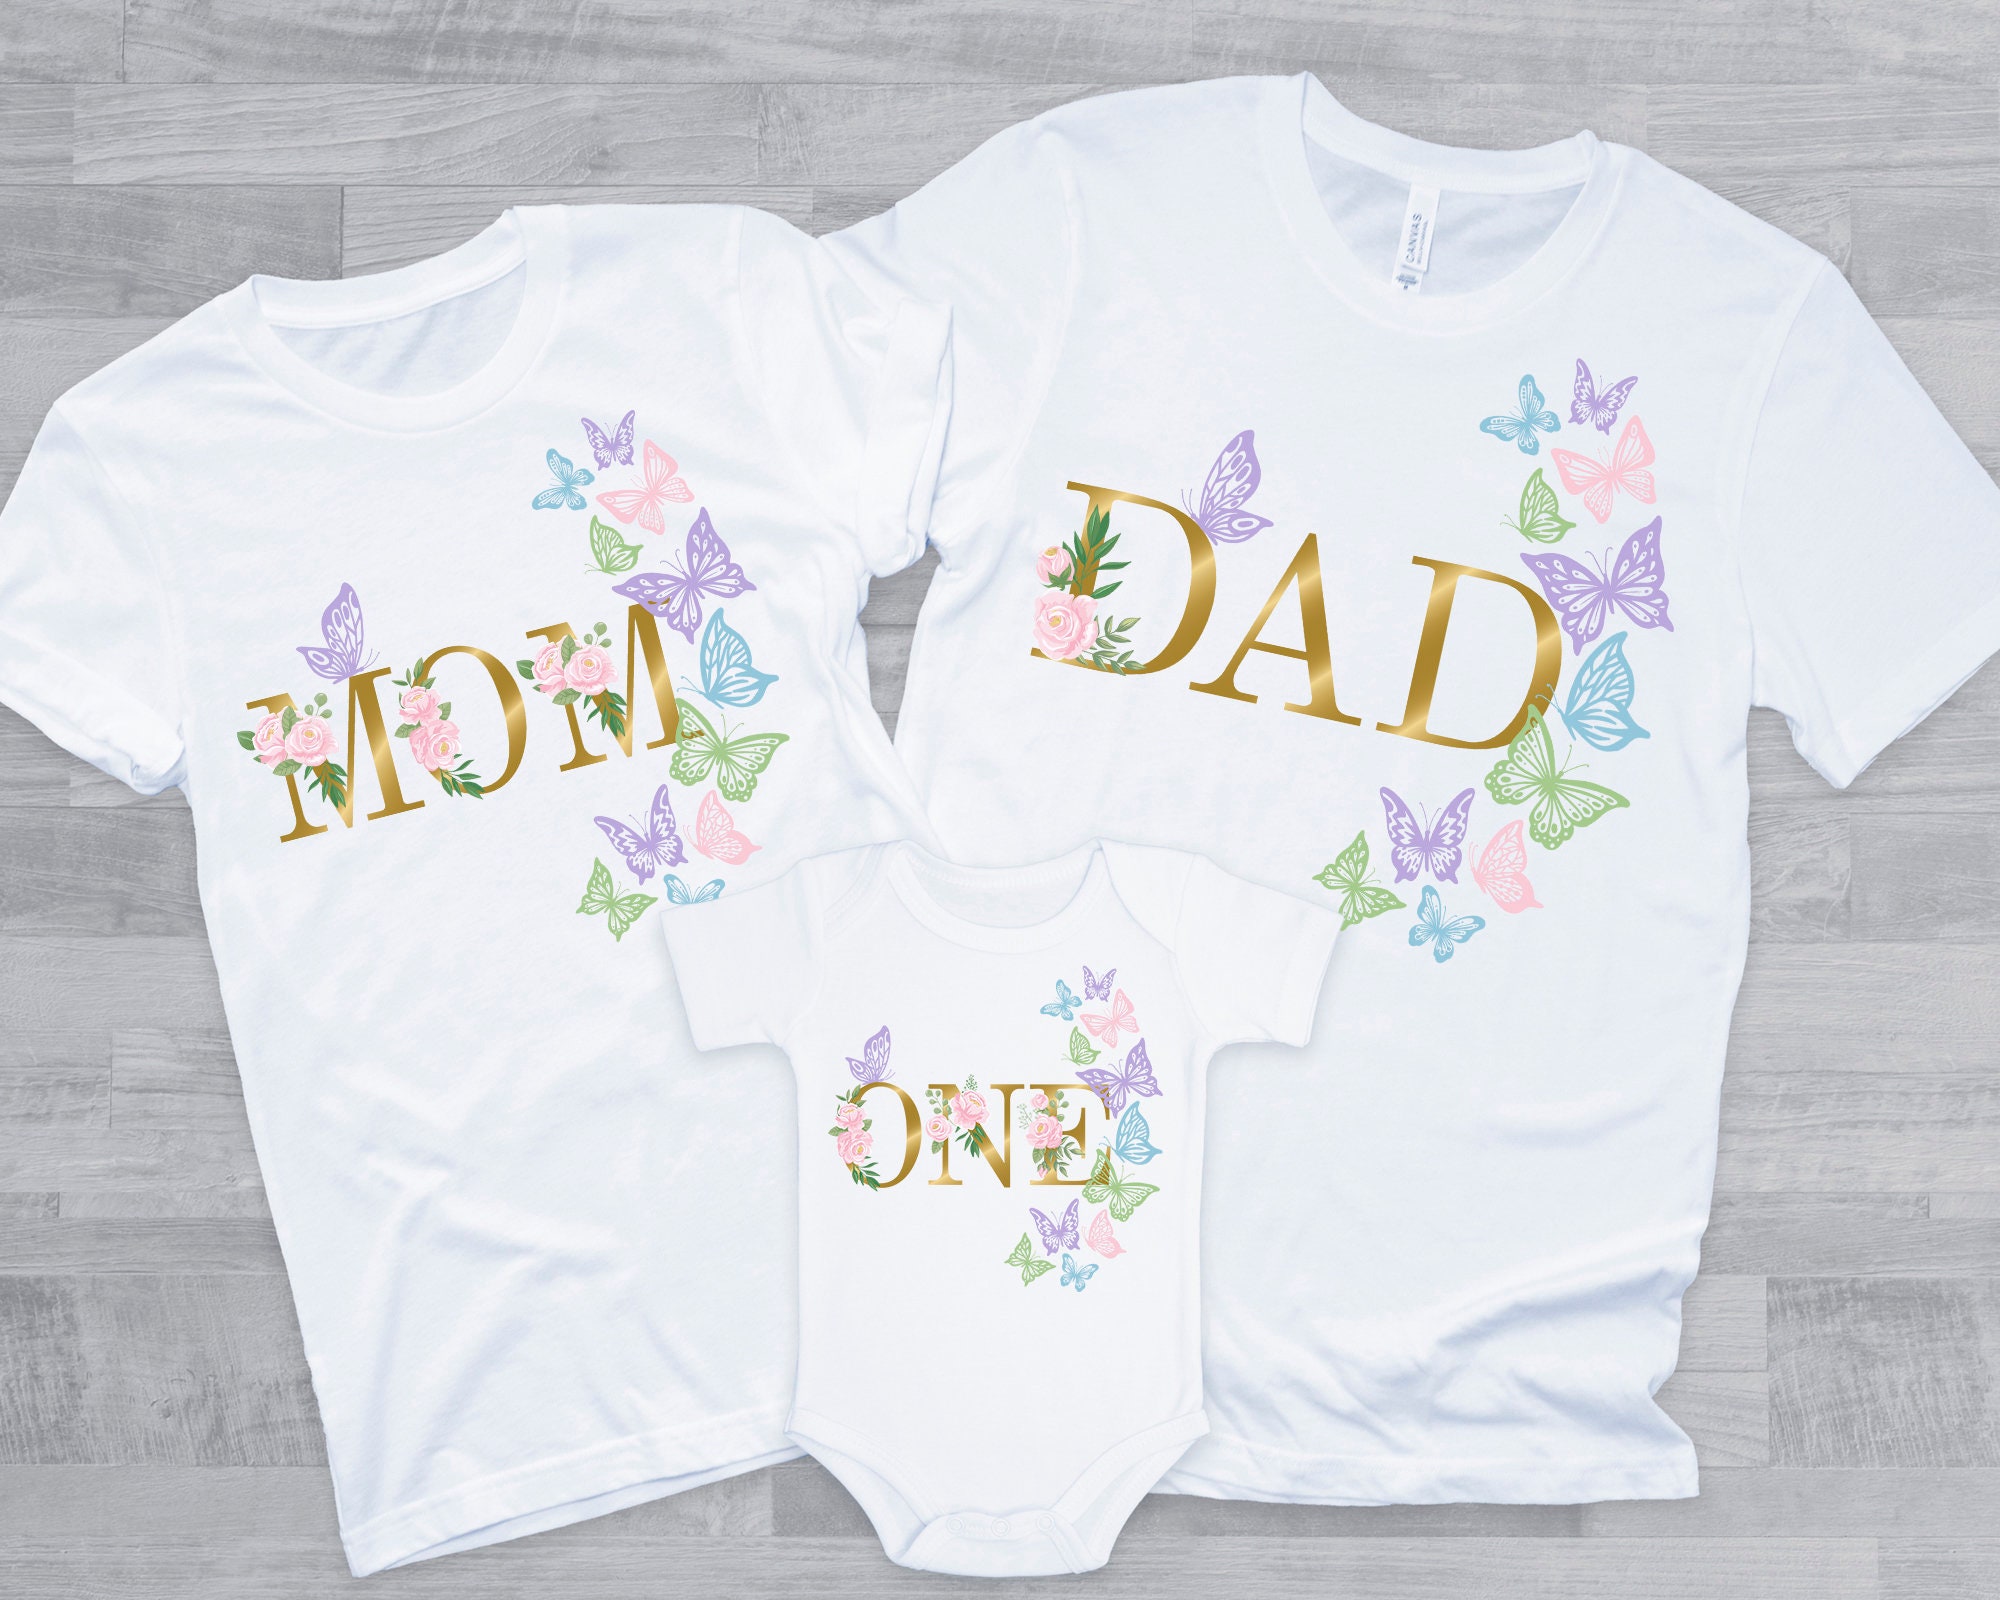 Pastel Rainbow Butterfly Birthday Shirt For Girls Floral Butterfly Shirt, Kleding Unisex kinderkleding Tops & T-shirts T-shirts Glitter Butterflies and Flowers Butterfly Birthday Shirt 